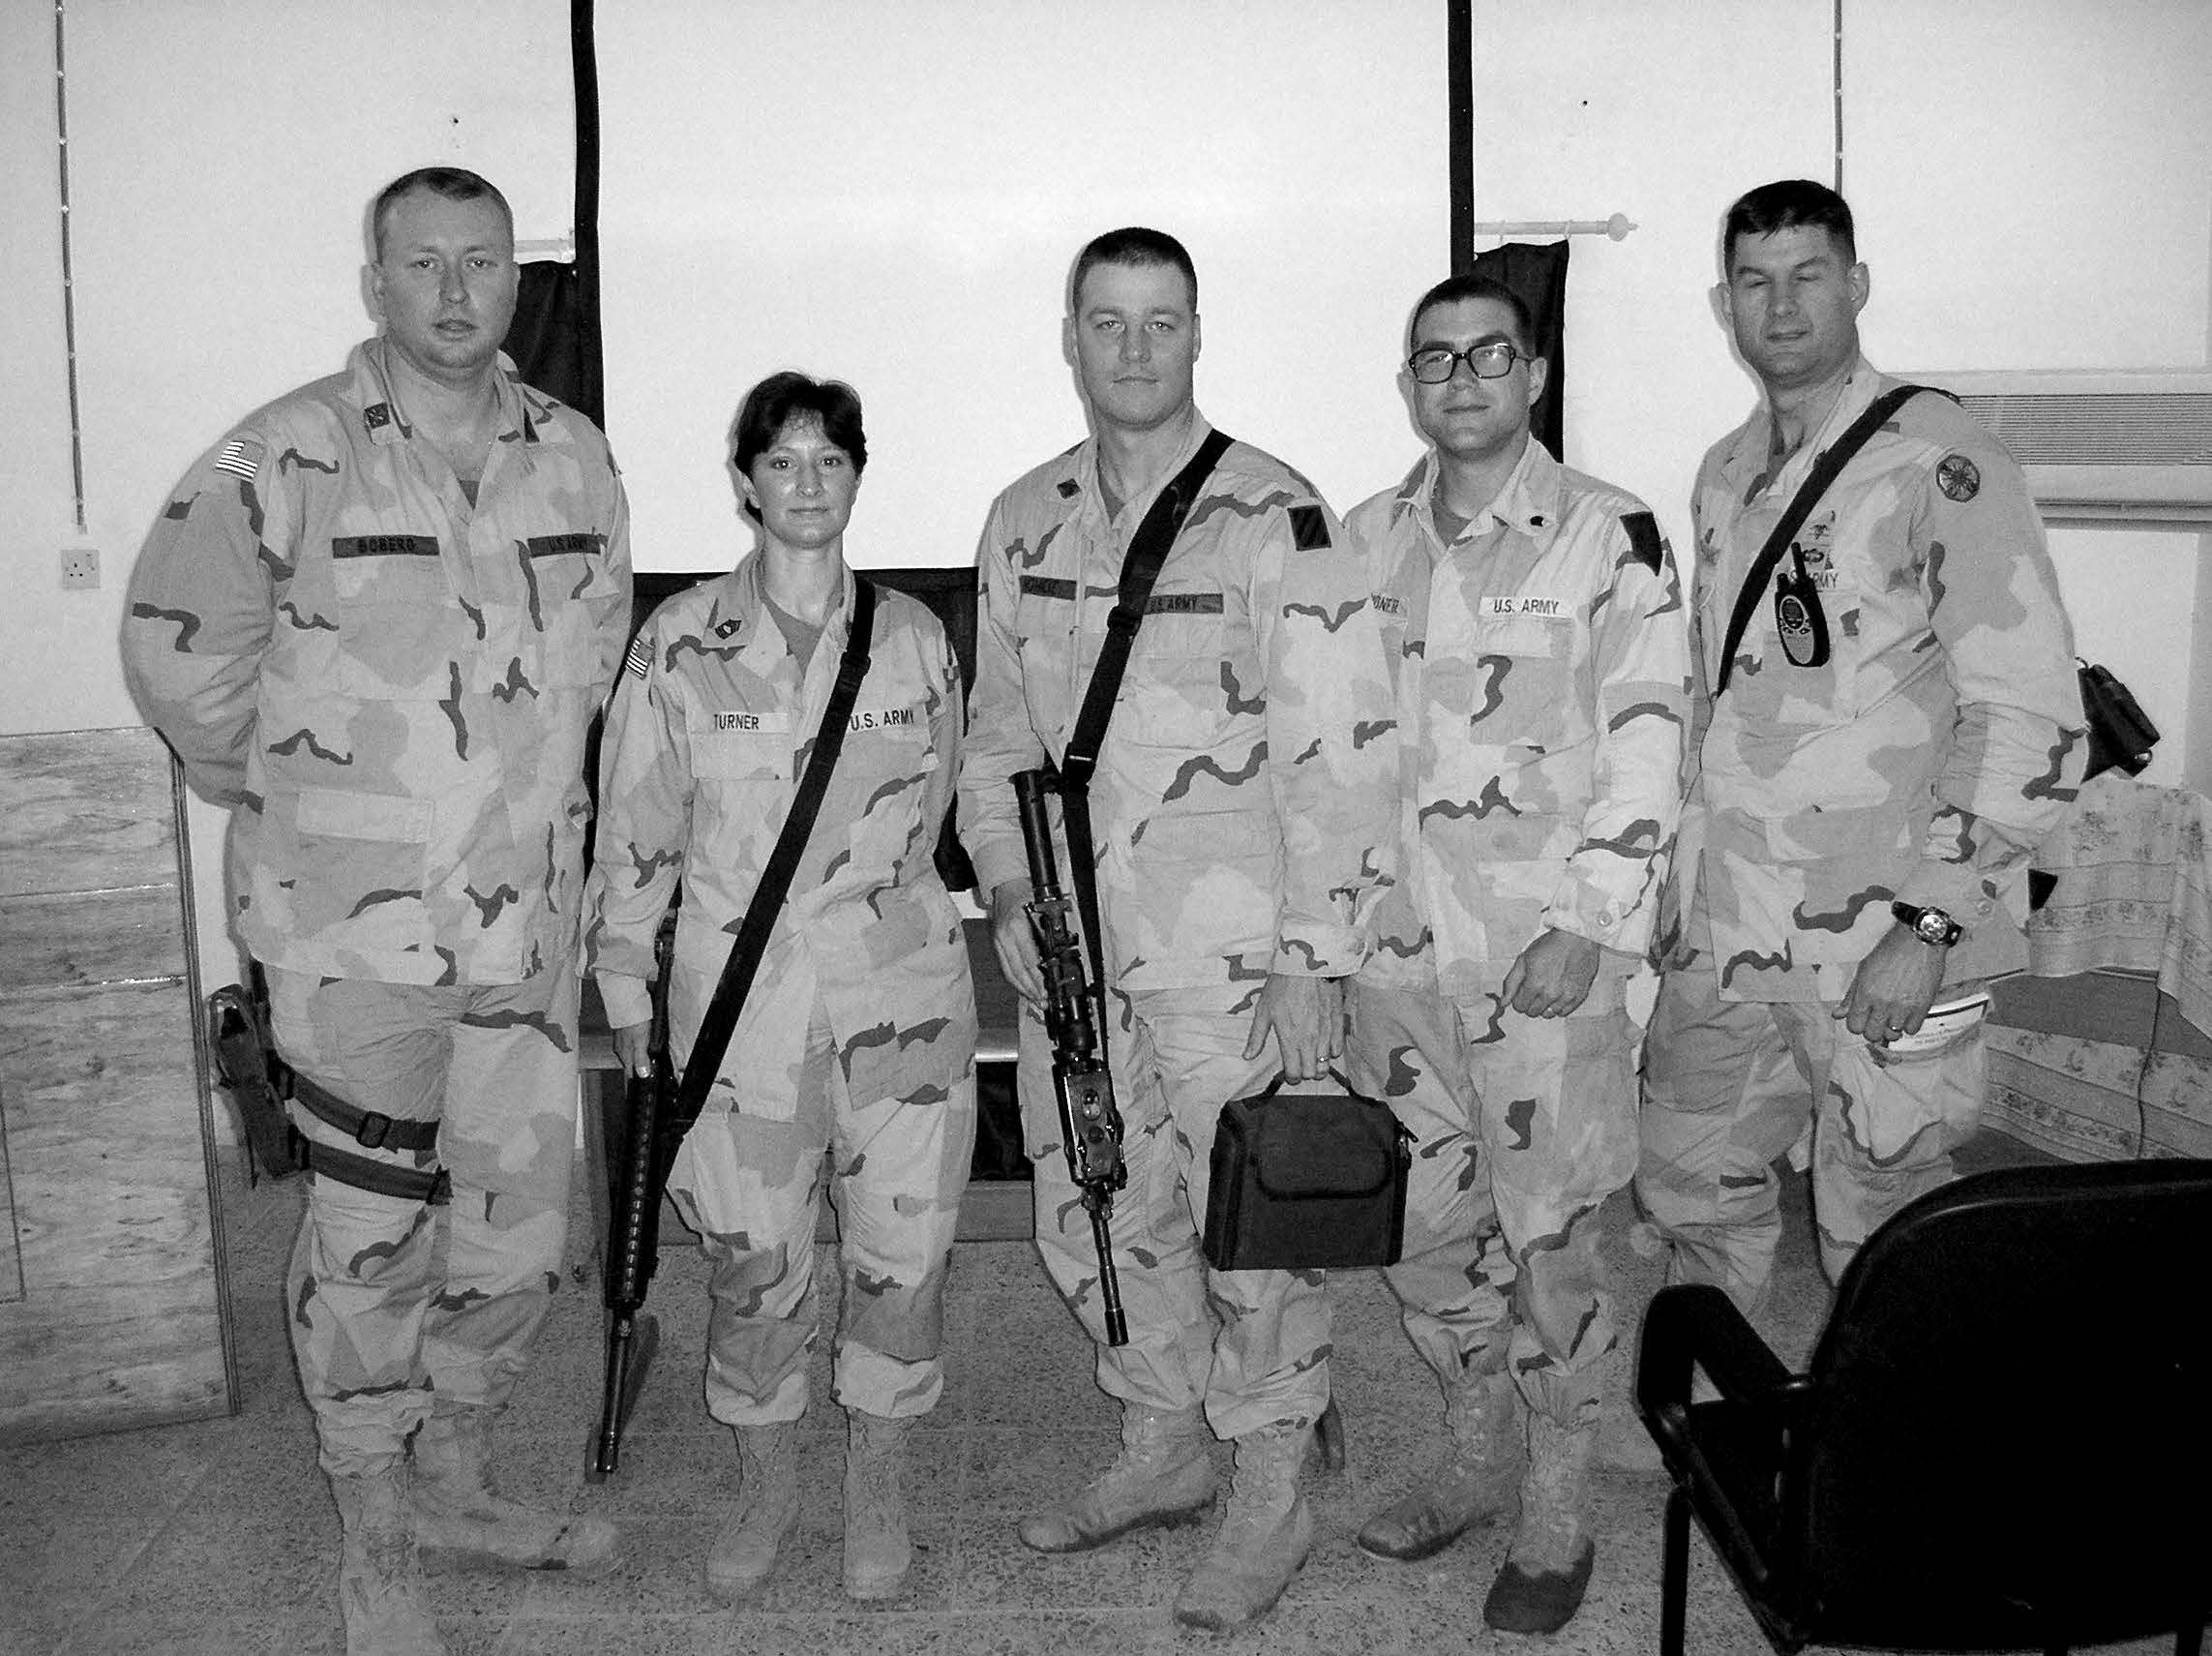 The Latter-day Saint service members’ group at Forward Operating Base Warhorse in Baquba, Iraq, during 2005. Courtesy of Marc E. “Dewey” Boberg.